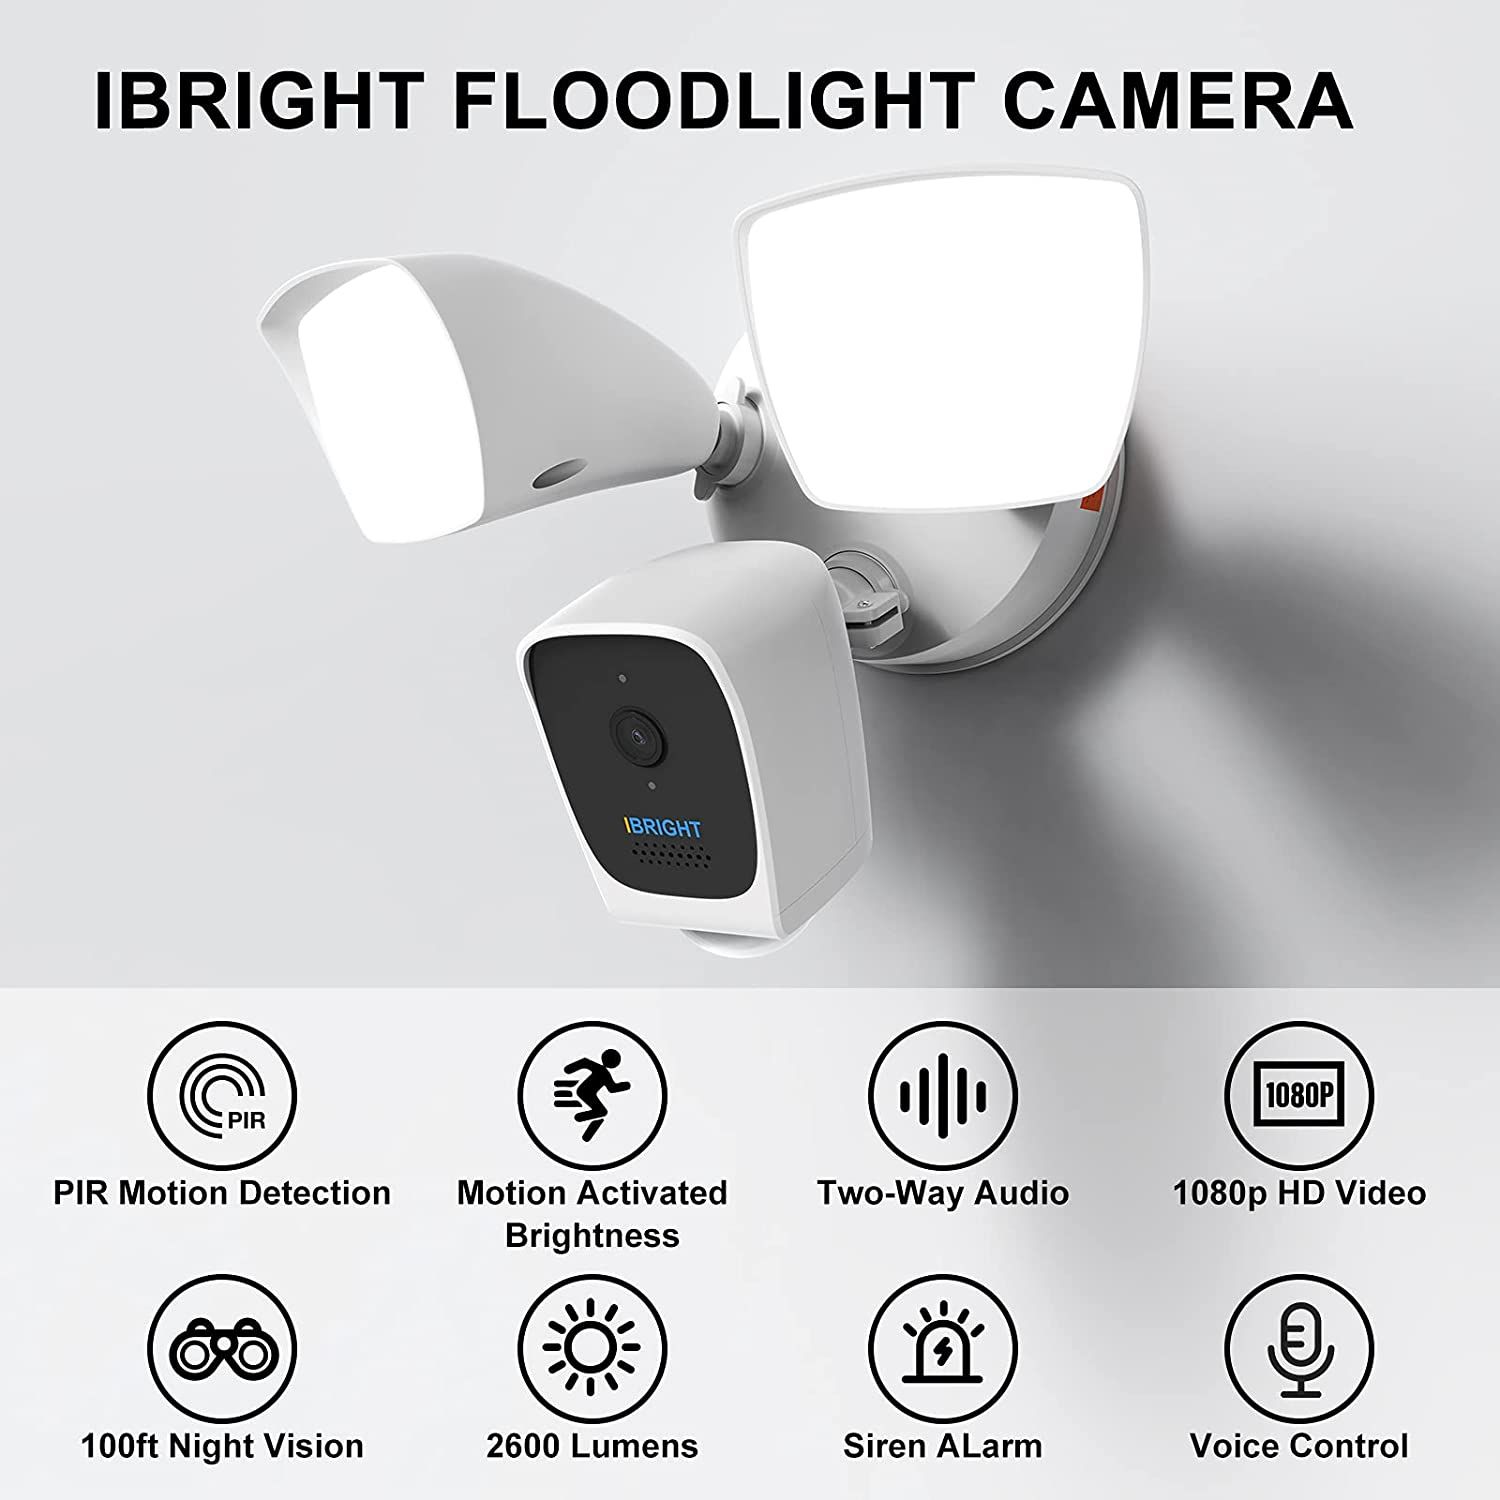 IBRIGHT Smart Floodlight Camera home security features